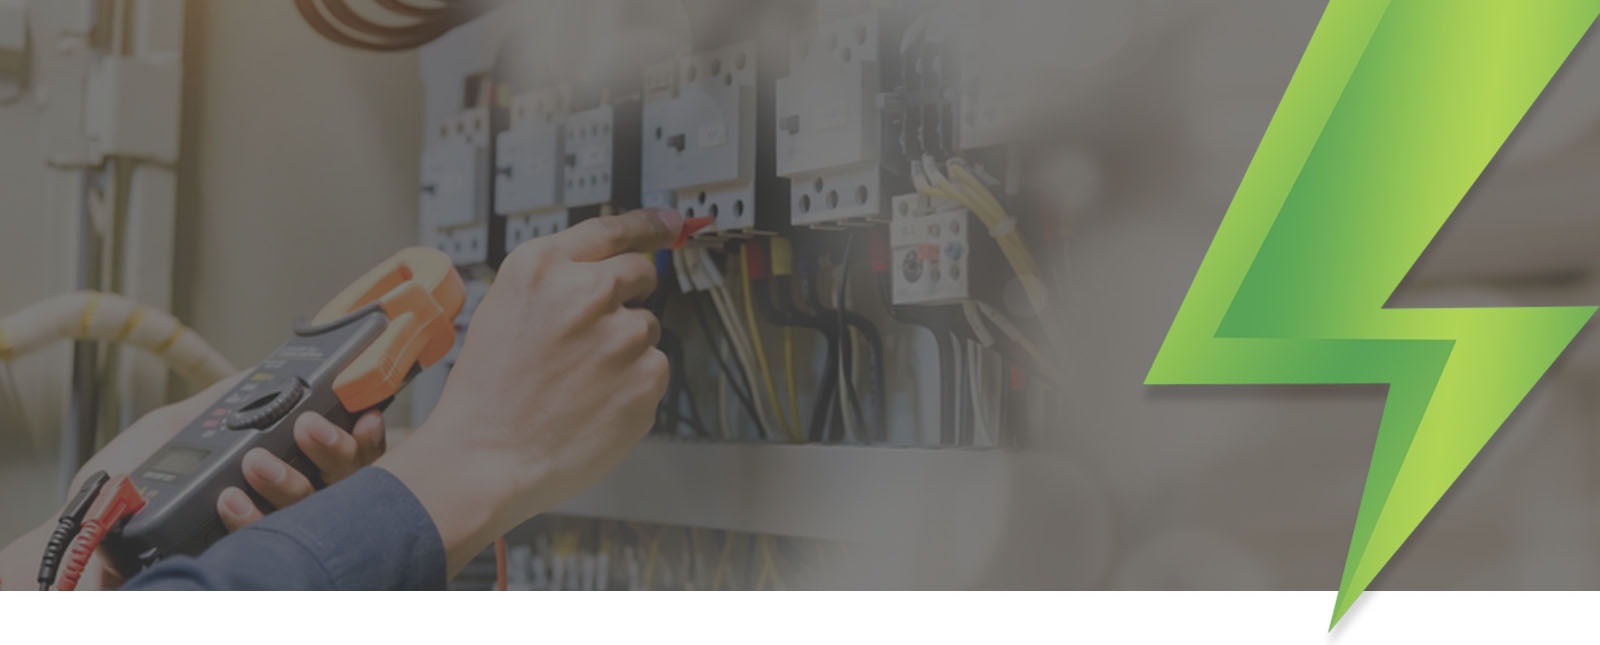 Residential, Commercial Electrician at Delray Electric Ltd. offers Electrical Services across St. Albert, Alberta